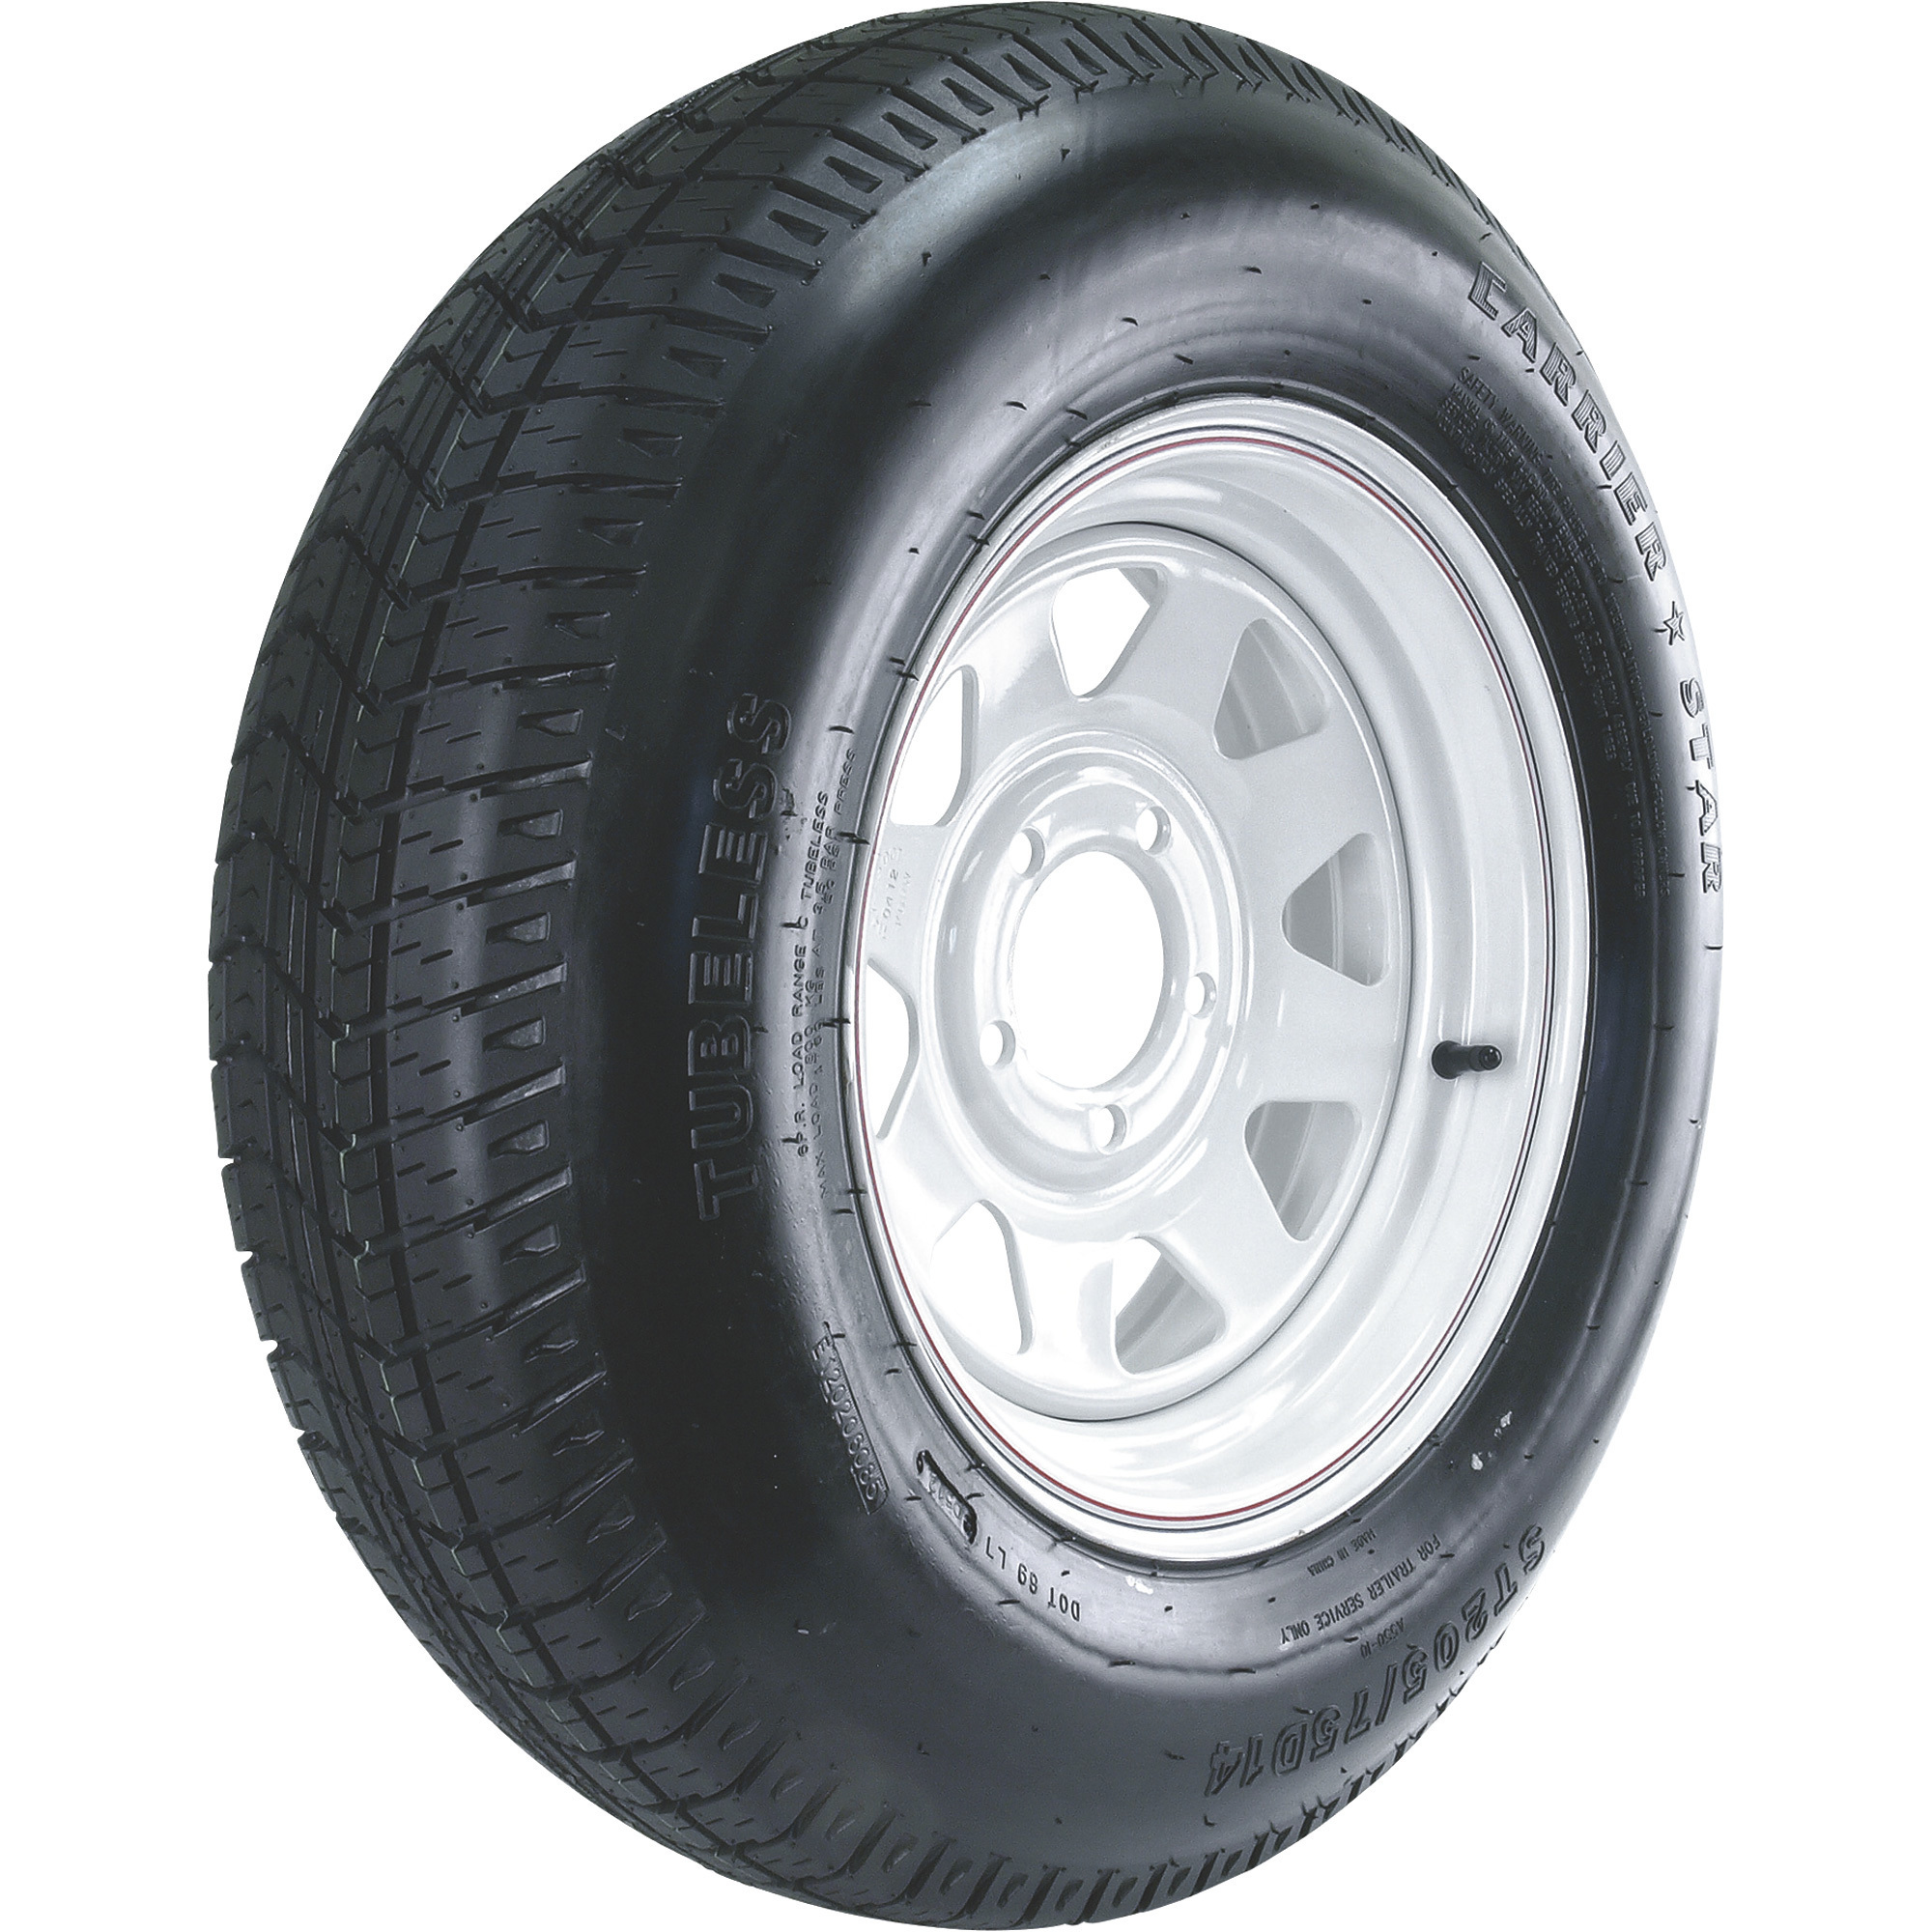 Kenda Carrier Star 14Inch Bias-Ply Trailer Tire and Wheel Assembly â ST205/75D-14, 5-Hole, Load Range C, Model DM205D4C-5CIN